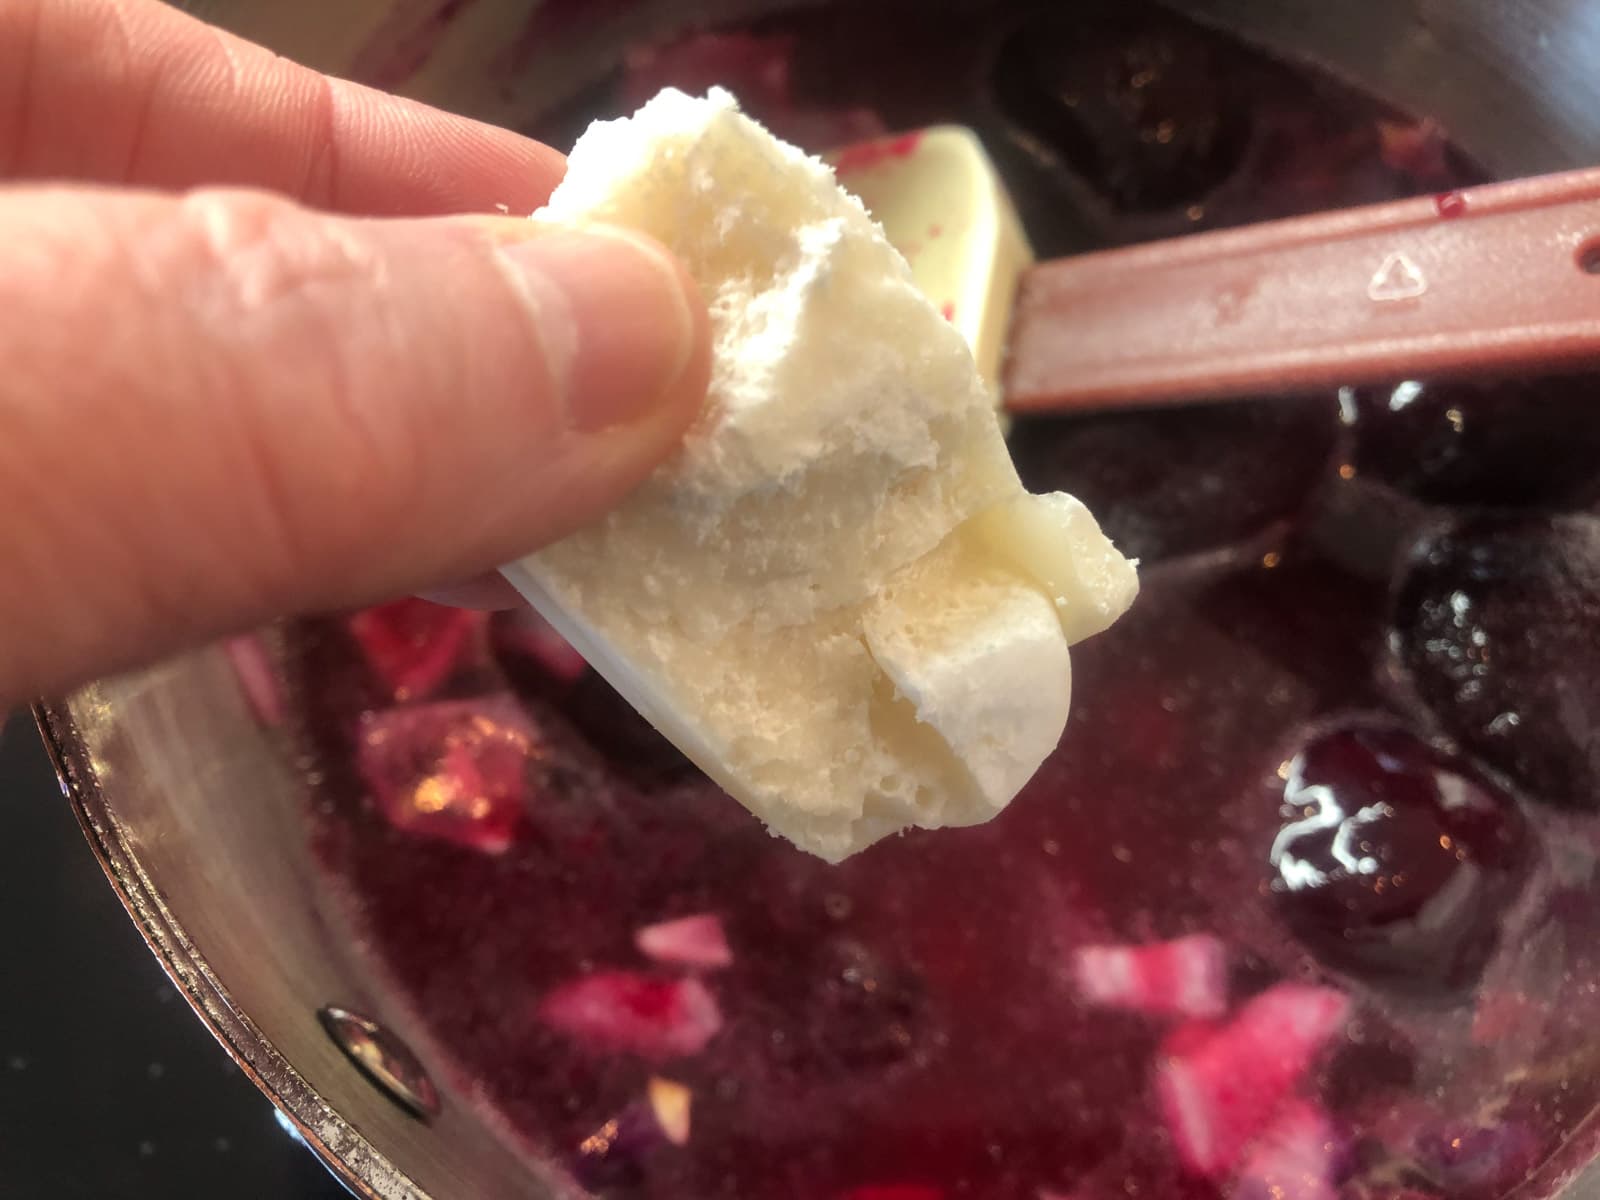 Coconut cream being added to a pan of beetroot for adding creaminess